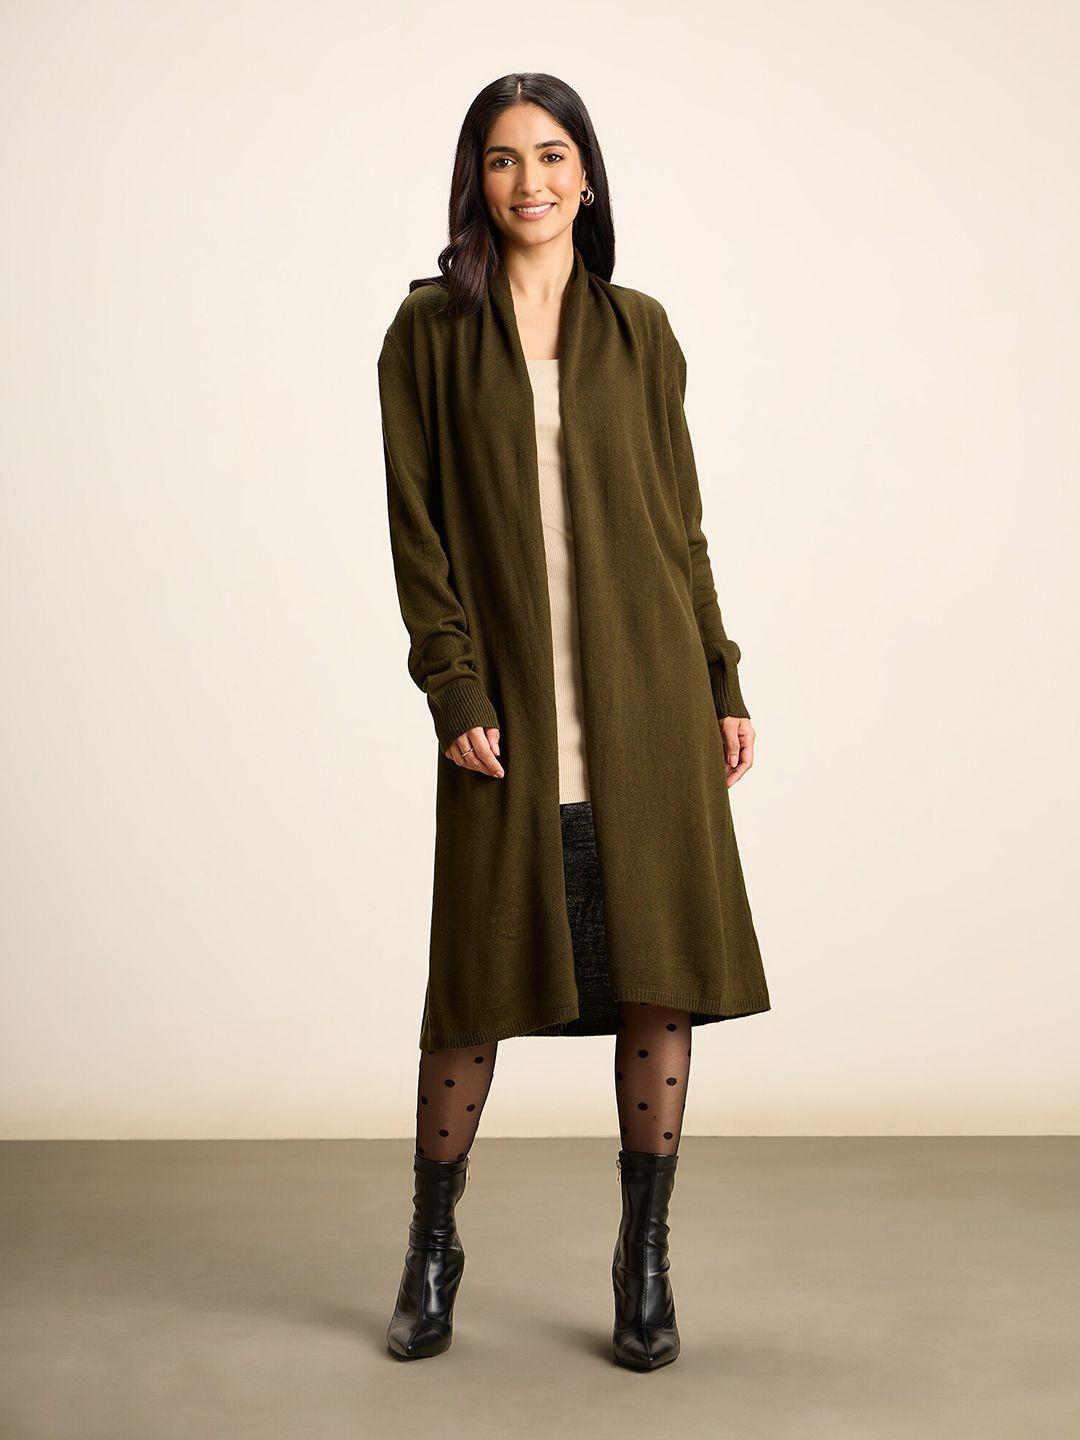 20dresses olive green open front longline acrylic cardigan